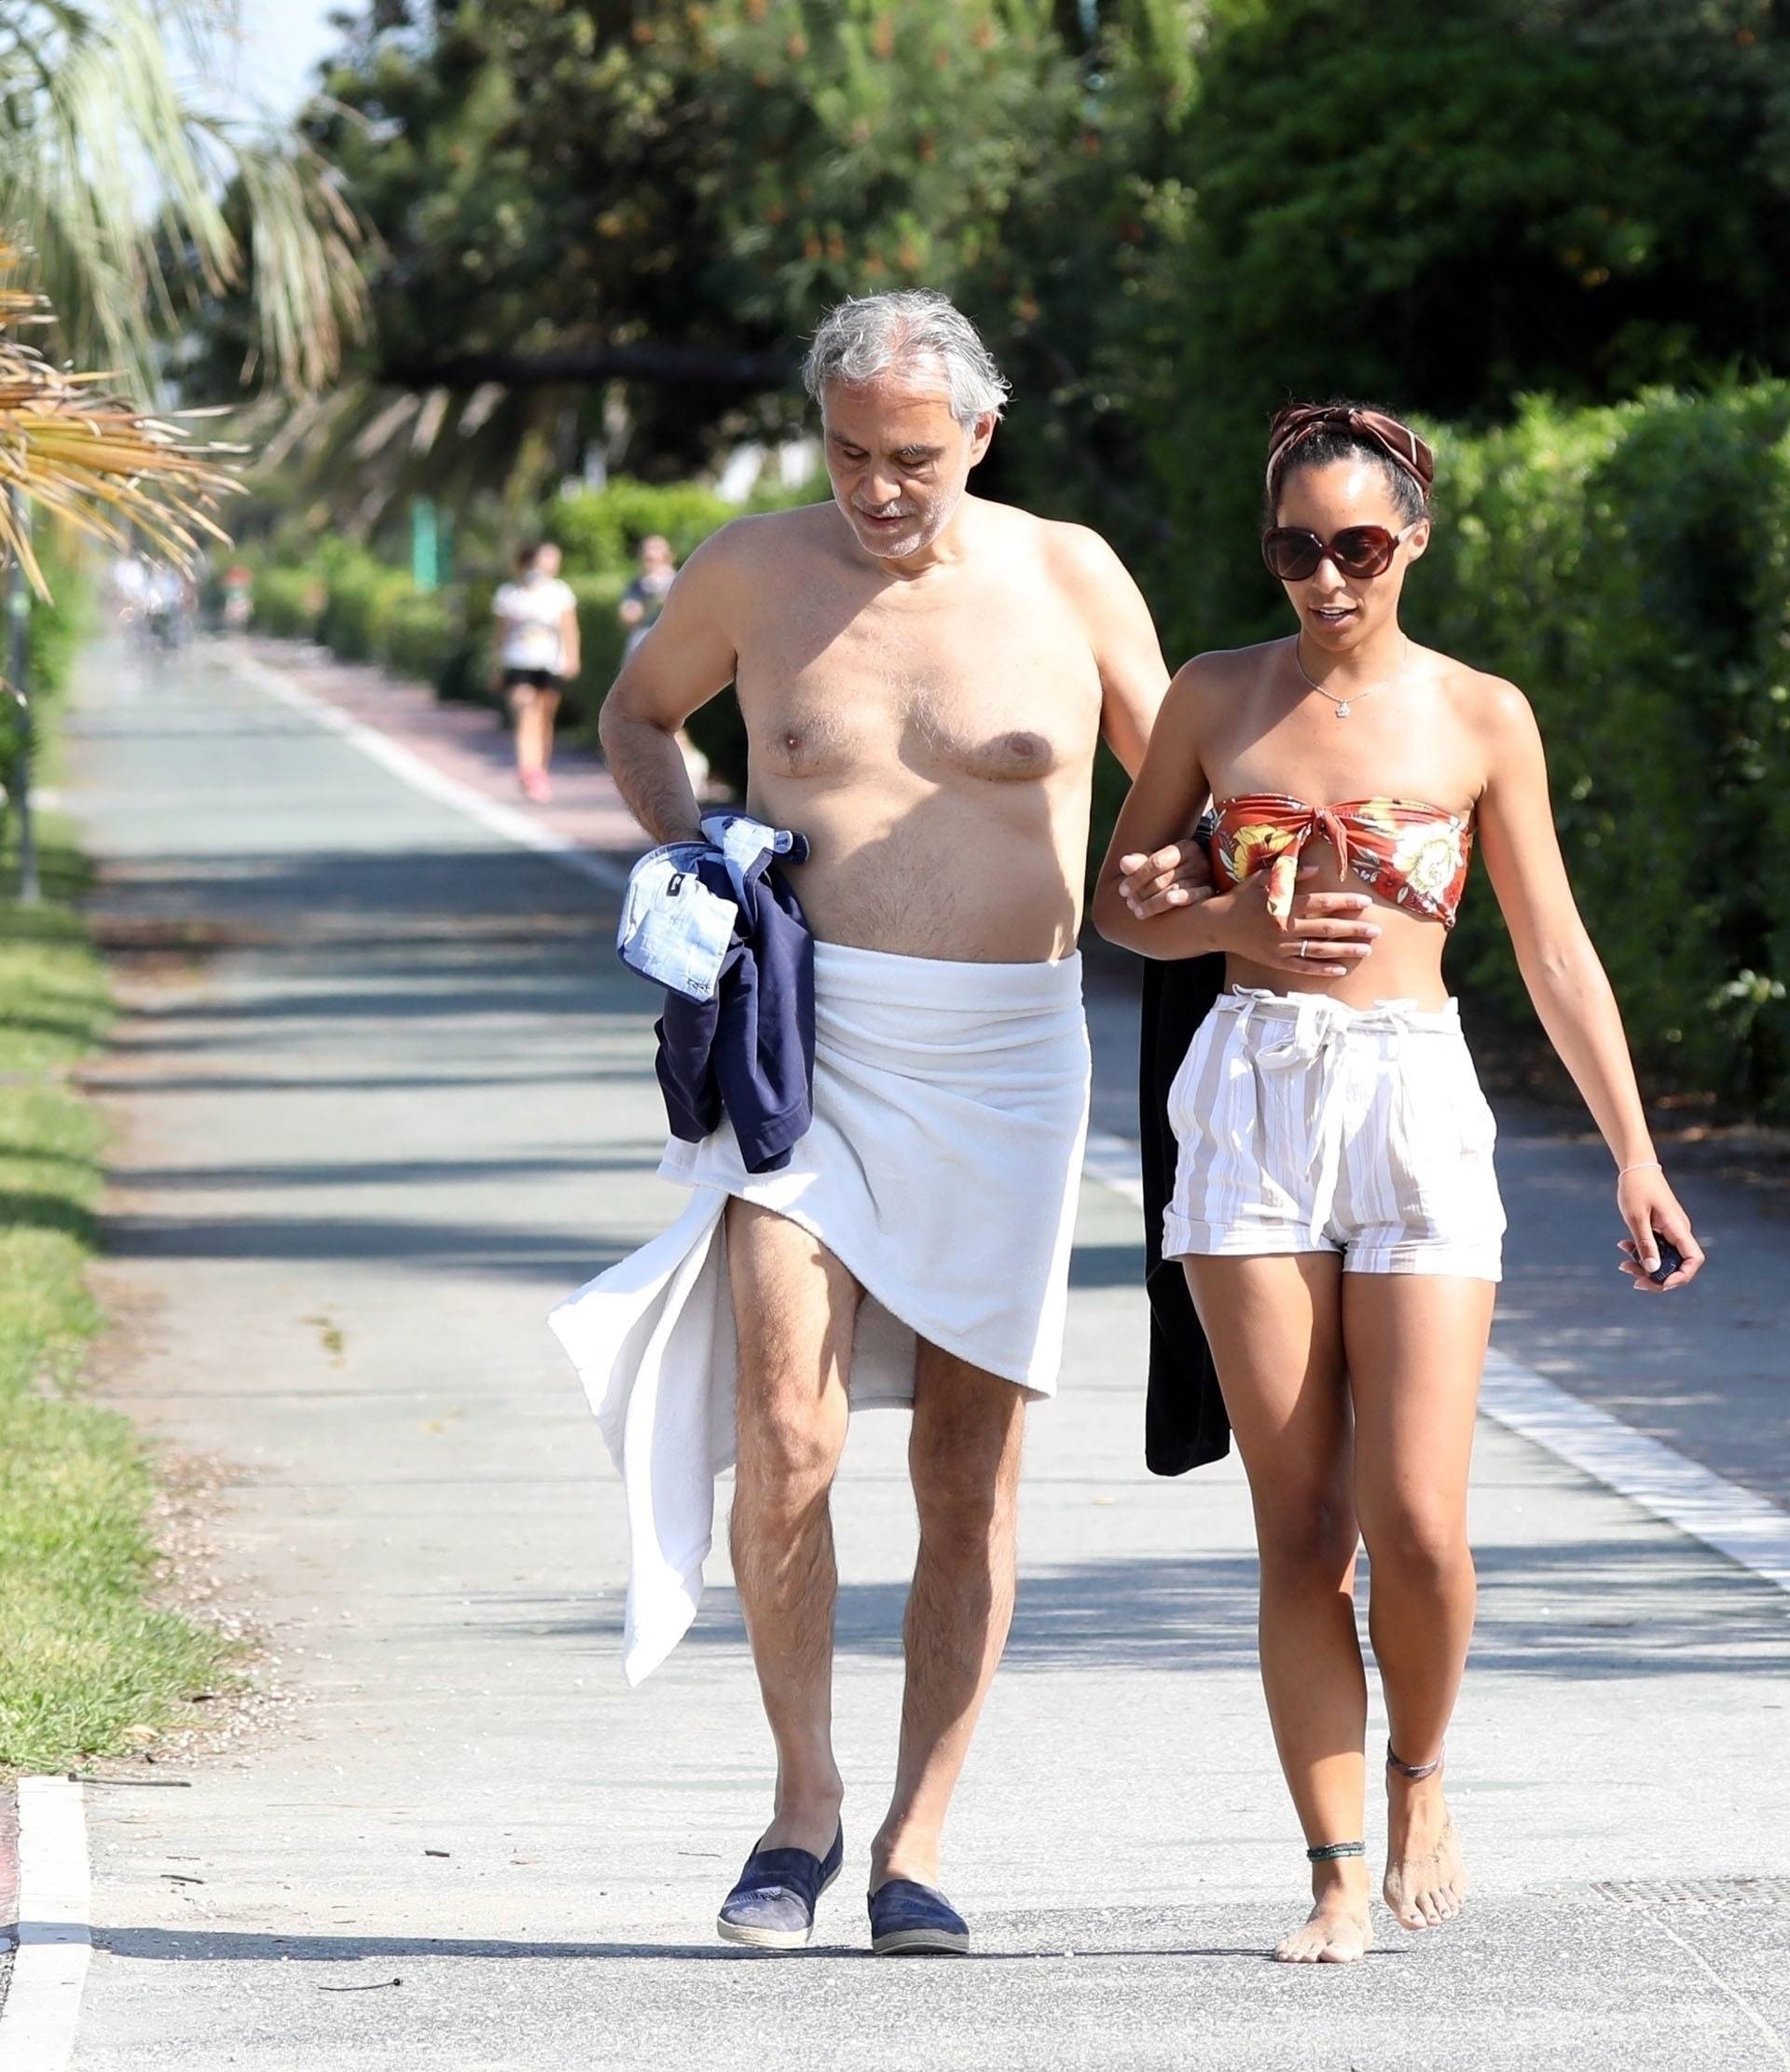 *EXCLUSIVE* MUST CALL FOR PRICING BEFORE USAGE  - Italian singer and Opera star Andrea Bocelli looks in good health after revealing recently that he contracted Coronavirus and made a full recovery by the end of March!